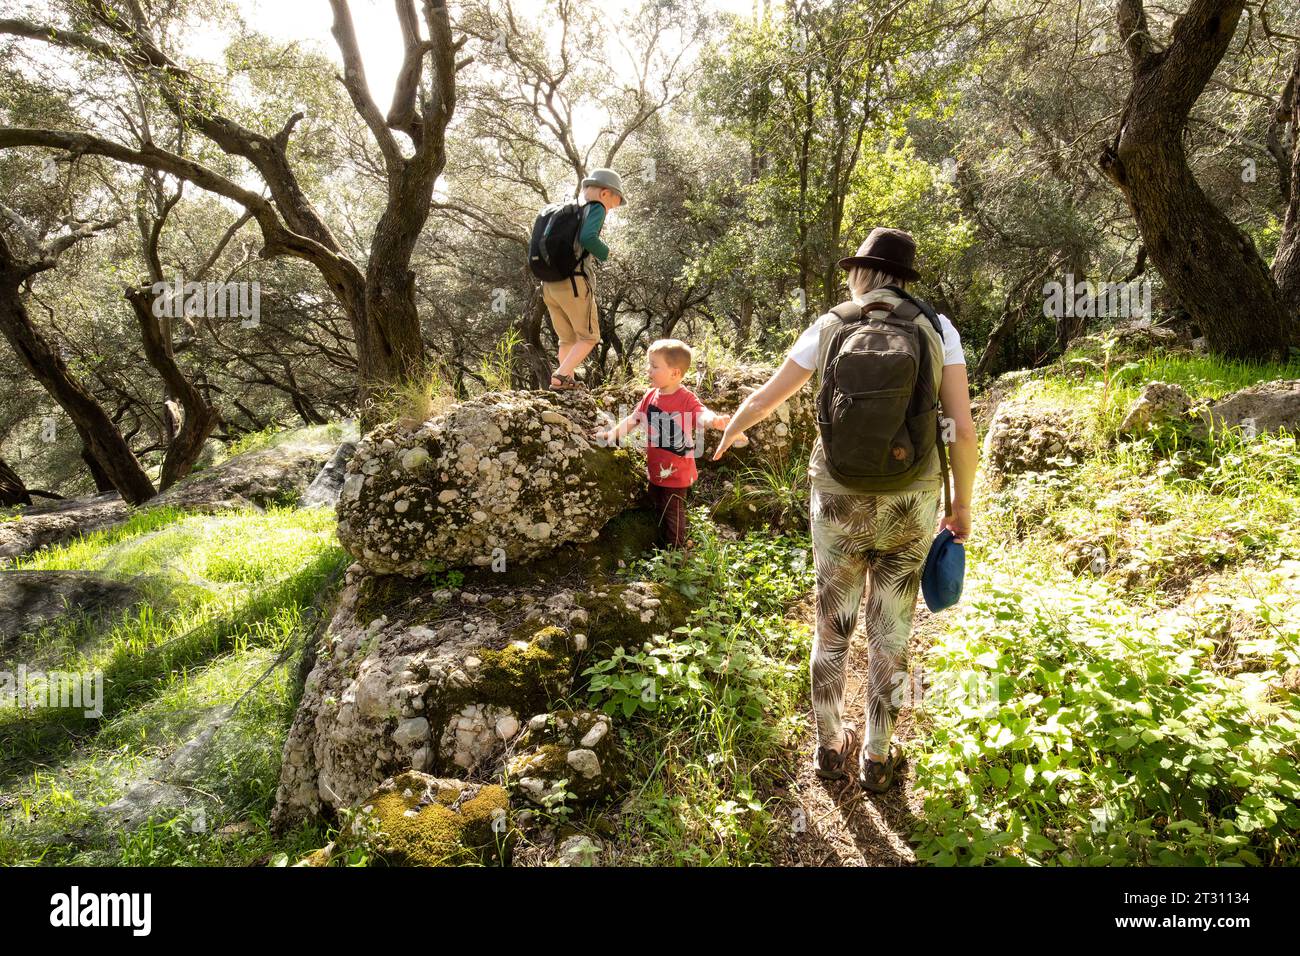 Family walking through an olive grove on holiday in Corfu, where netting has been stretched over the ground to catch the ripening fruit. Stock Photo